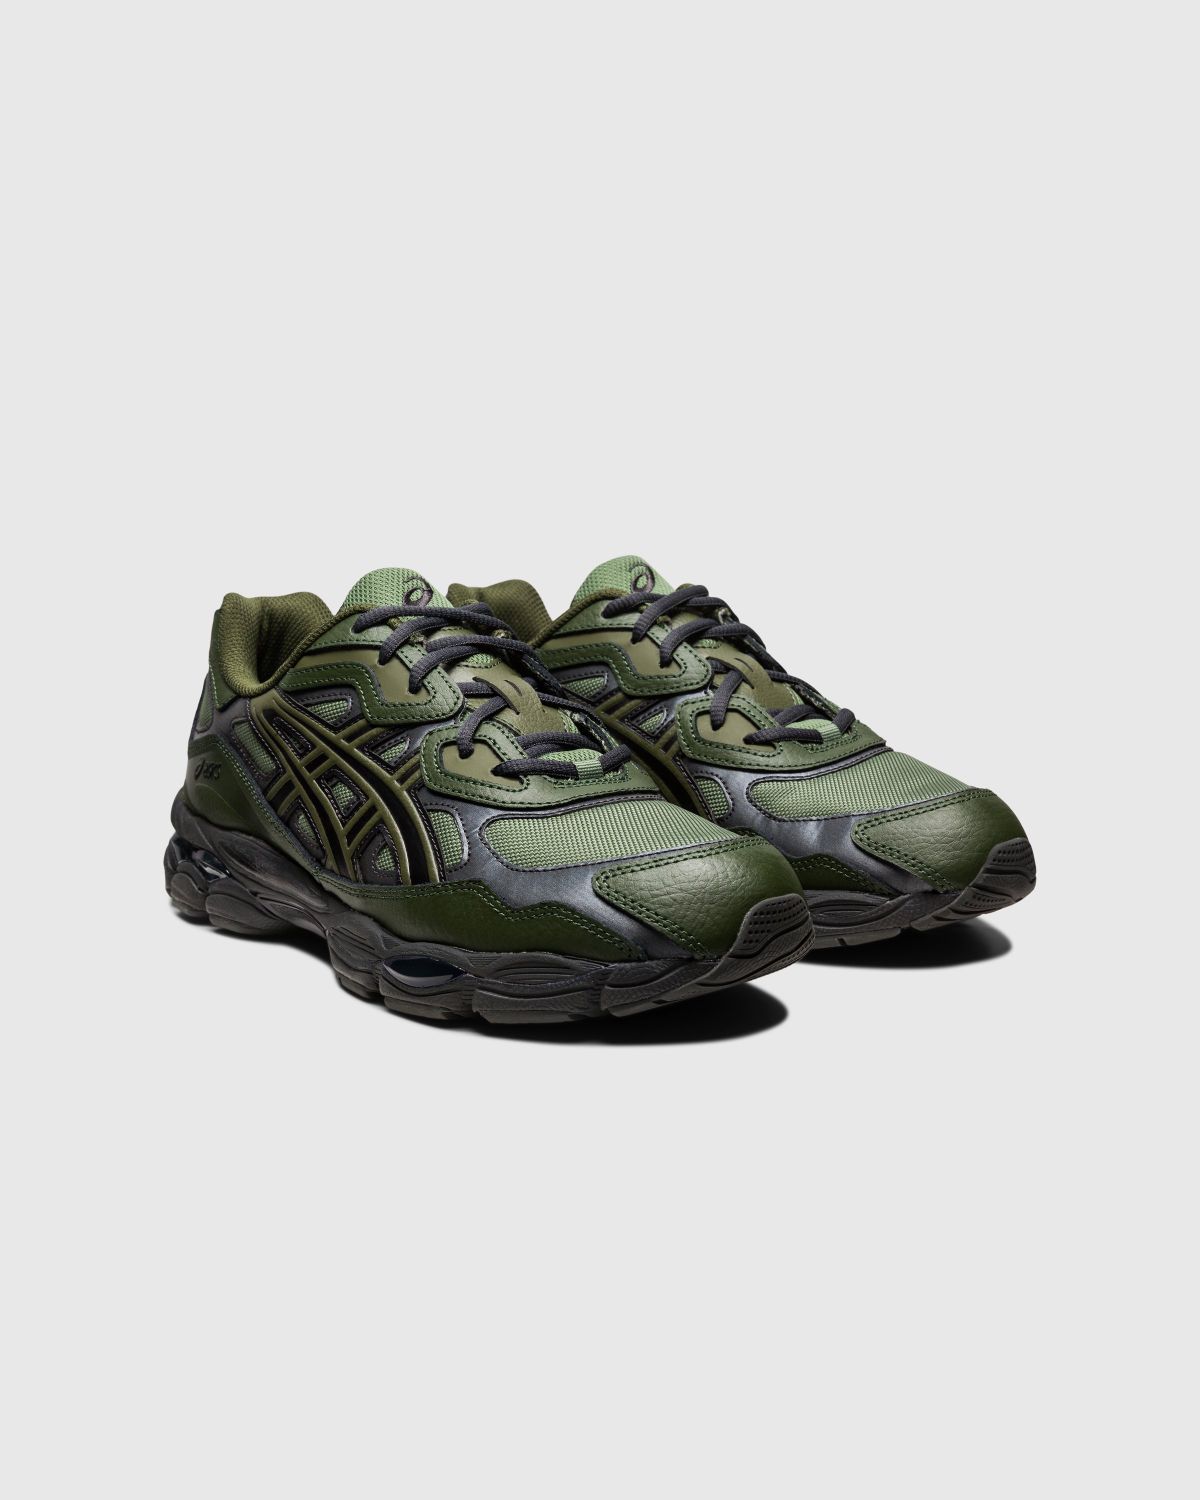 asics – GEL-NYC Moss/Forest - Sneakers - Green - Image 3